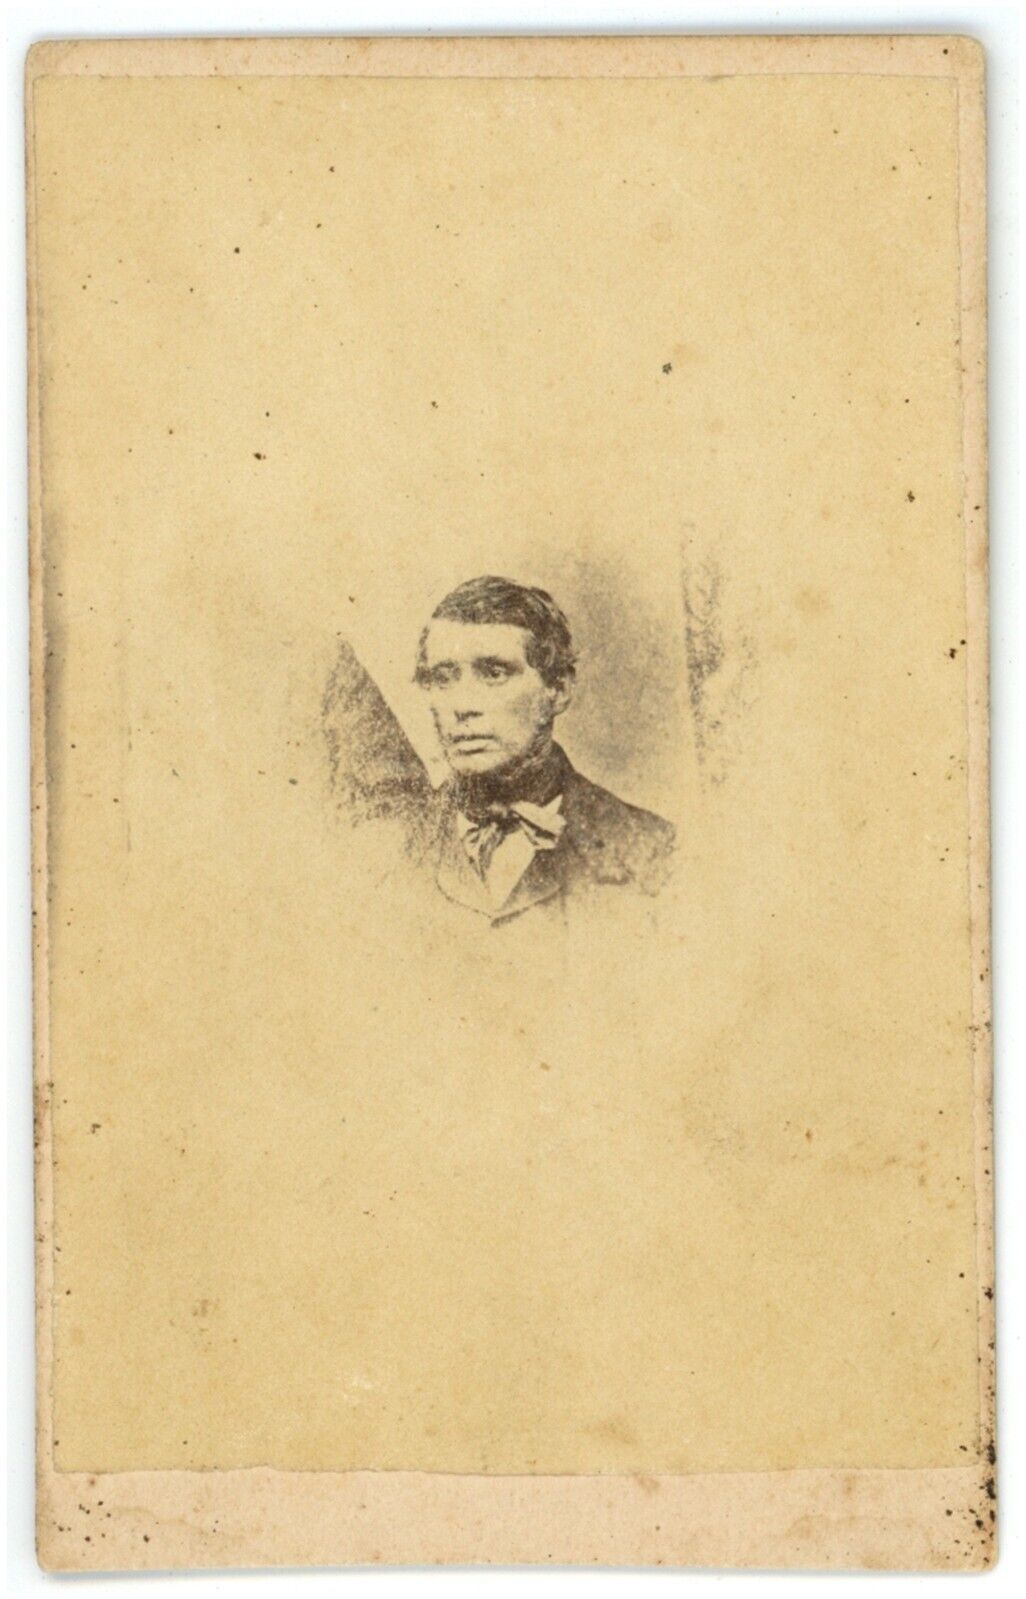 CIRCA 1880'S CDV Featuring Small Image of Man In Suit Photo by Brown Trenton NJ